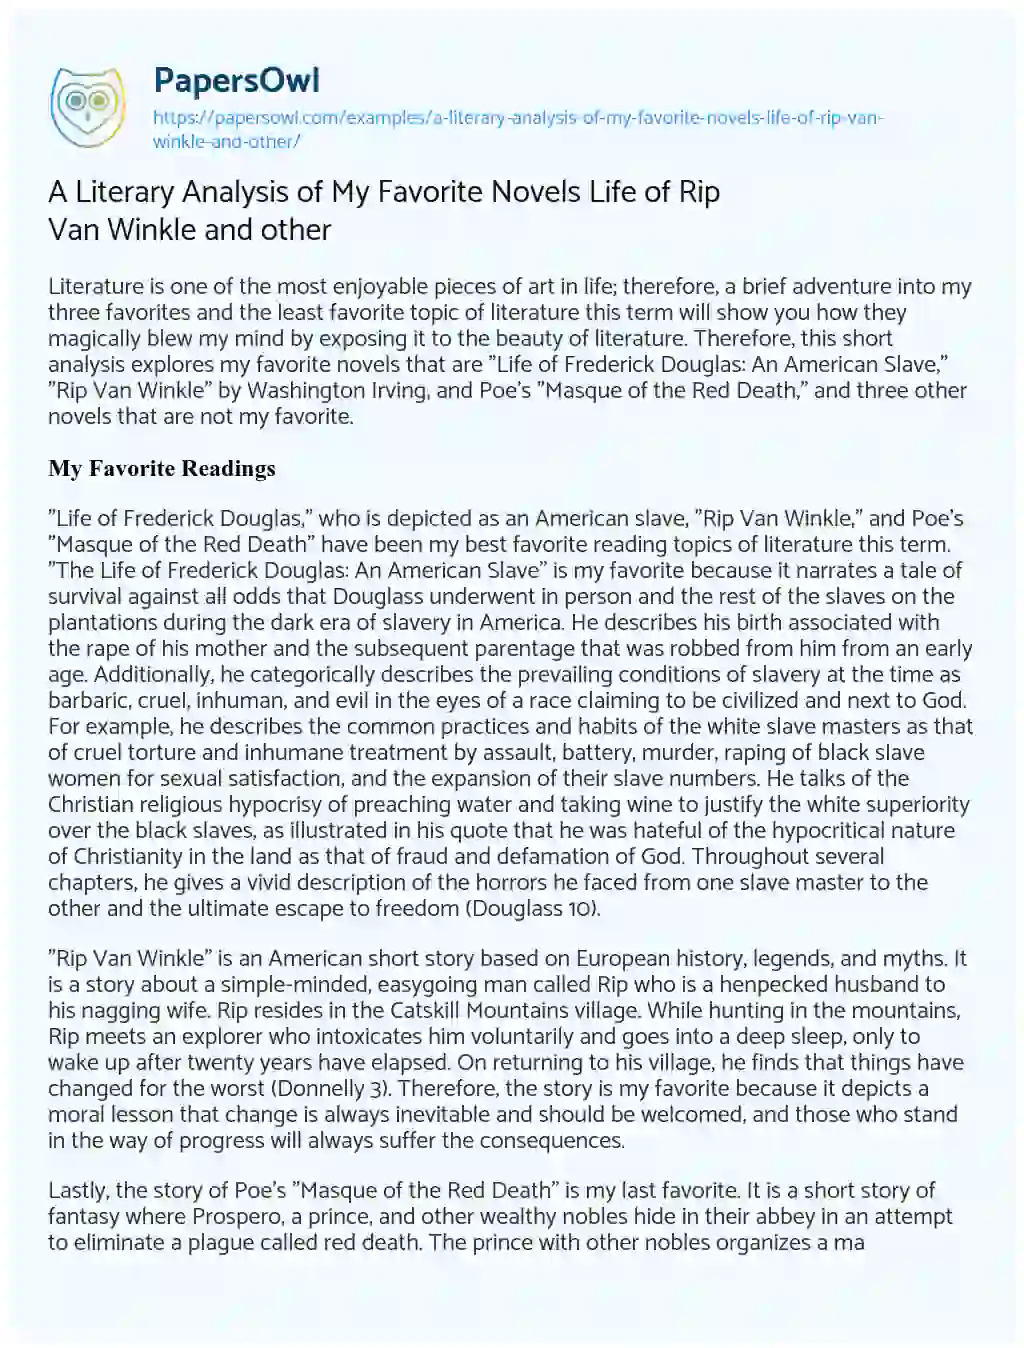 Essay on A Literary Analysis of my Favorite Novels Life of Rip Van Winkle and other